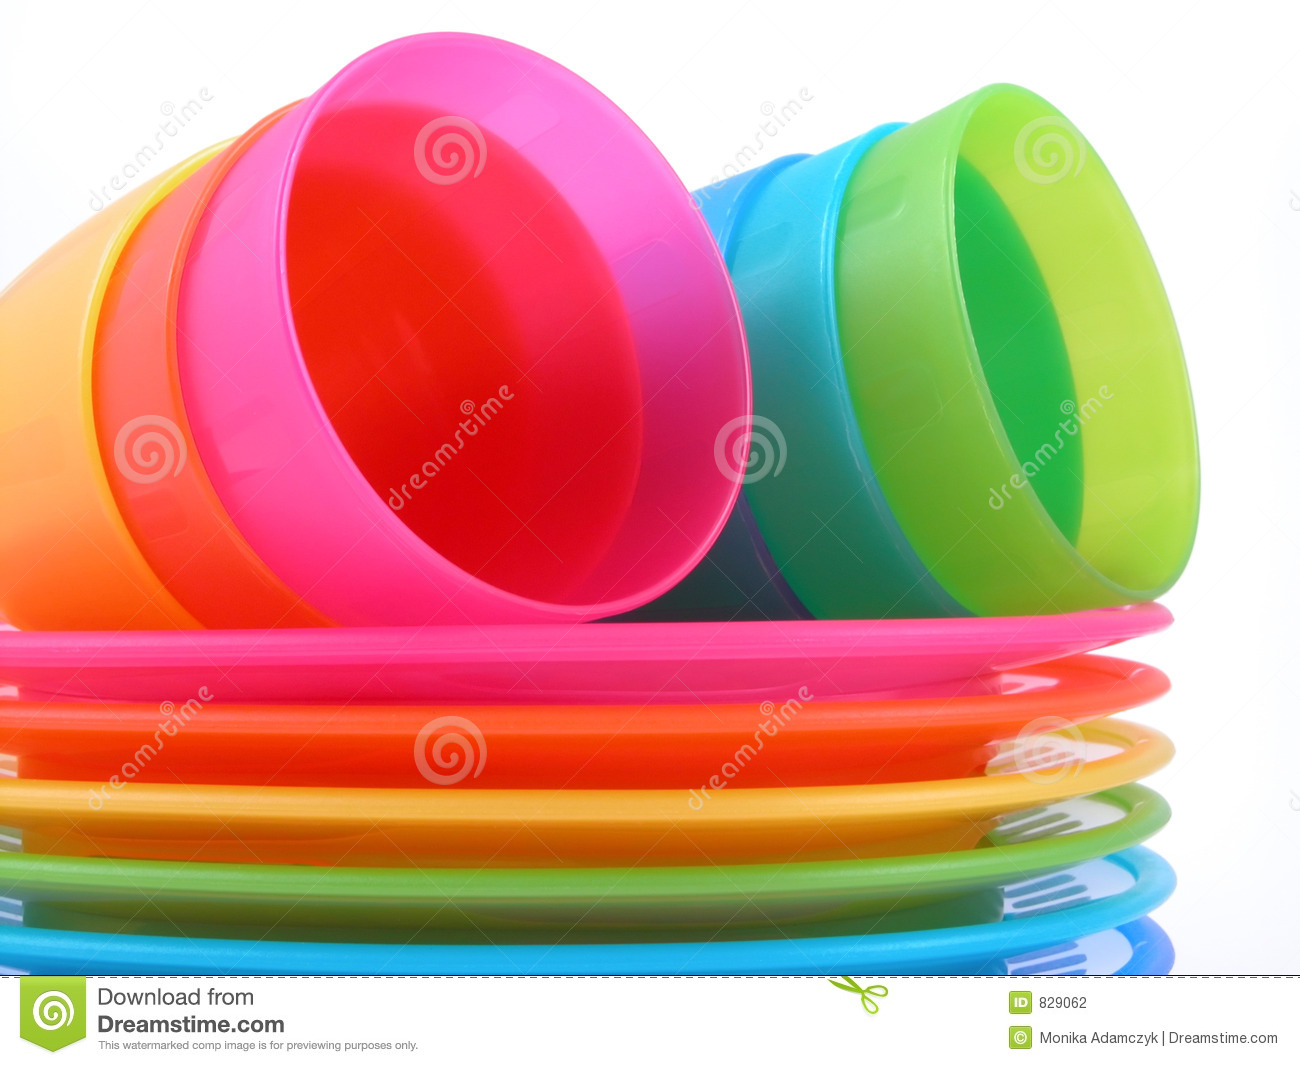 Plastic Cups And Plates Stock Photography   Image  829062